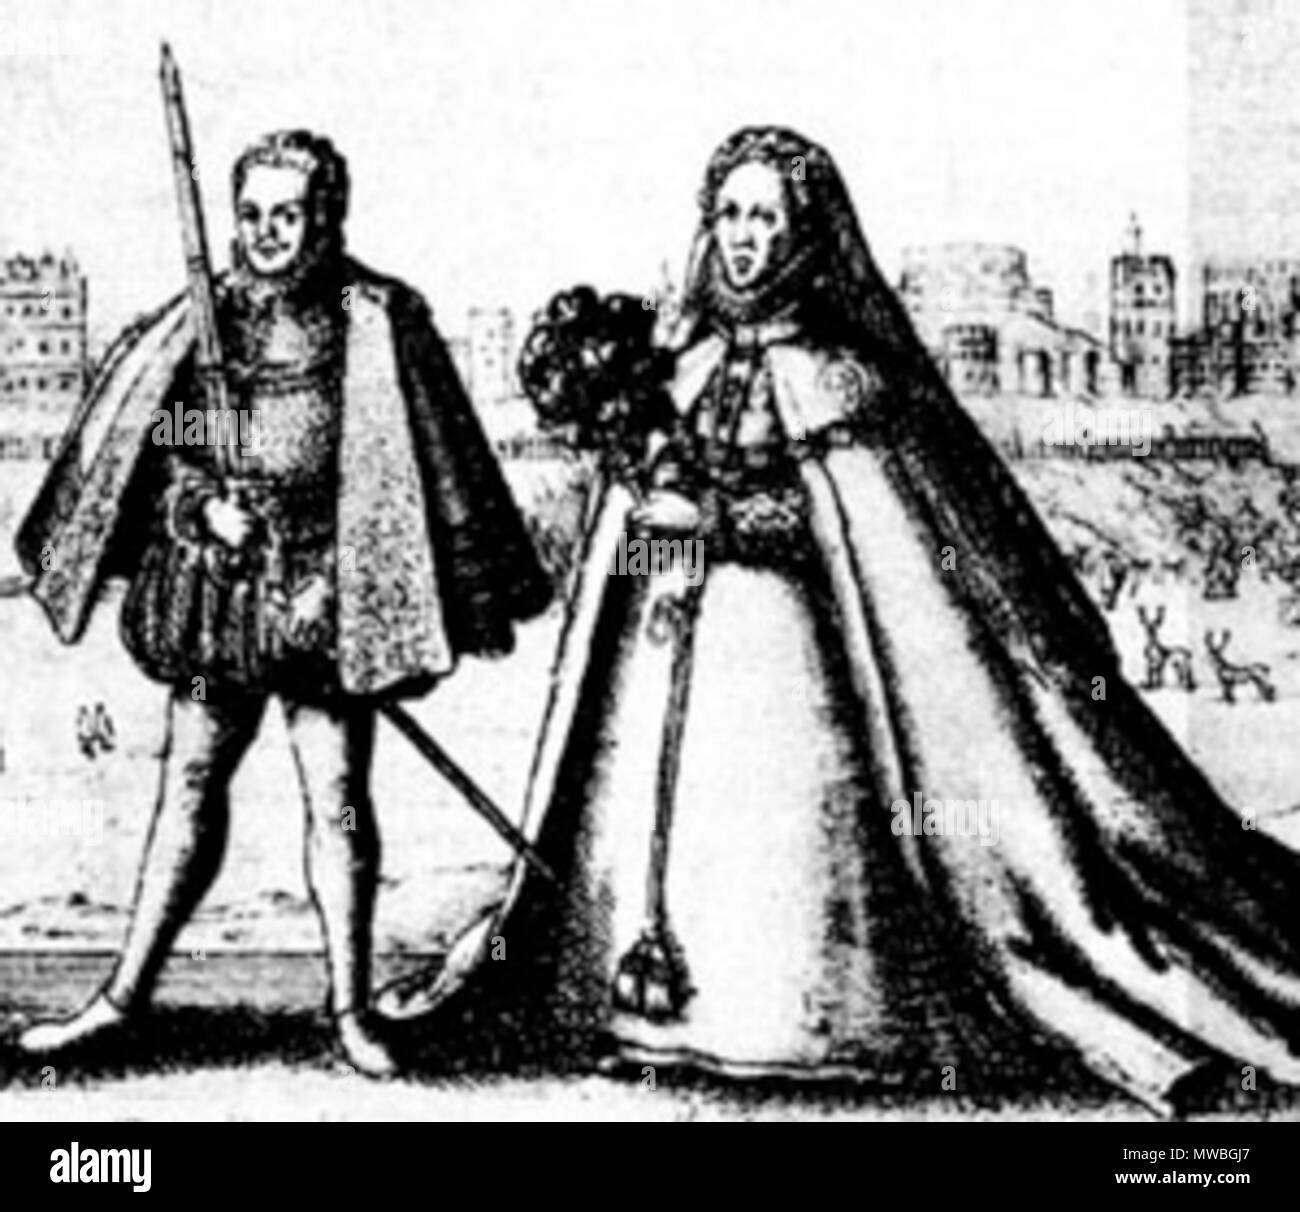 . English: Earl of Hertford (mistakenly identified as the 17th earl of Oxford on p. 190 of The de Veres of Castle Hedingham (1993) by Verily Anderson) and Queen Elizabeth I in the 1576 Procession of the Knights of the Garter. Detail of larger print. 26 May 2012. Wenceslaus (Wenzel) Hollar after Marcus Gheeraerts the Elder 175 Earl of Hertford and Queen Elizabeth I Stock Photo